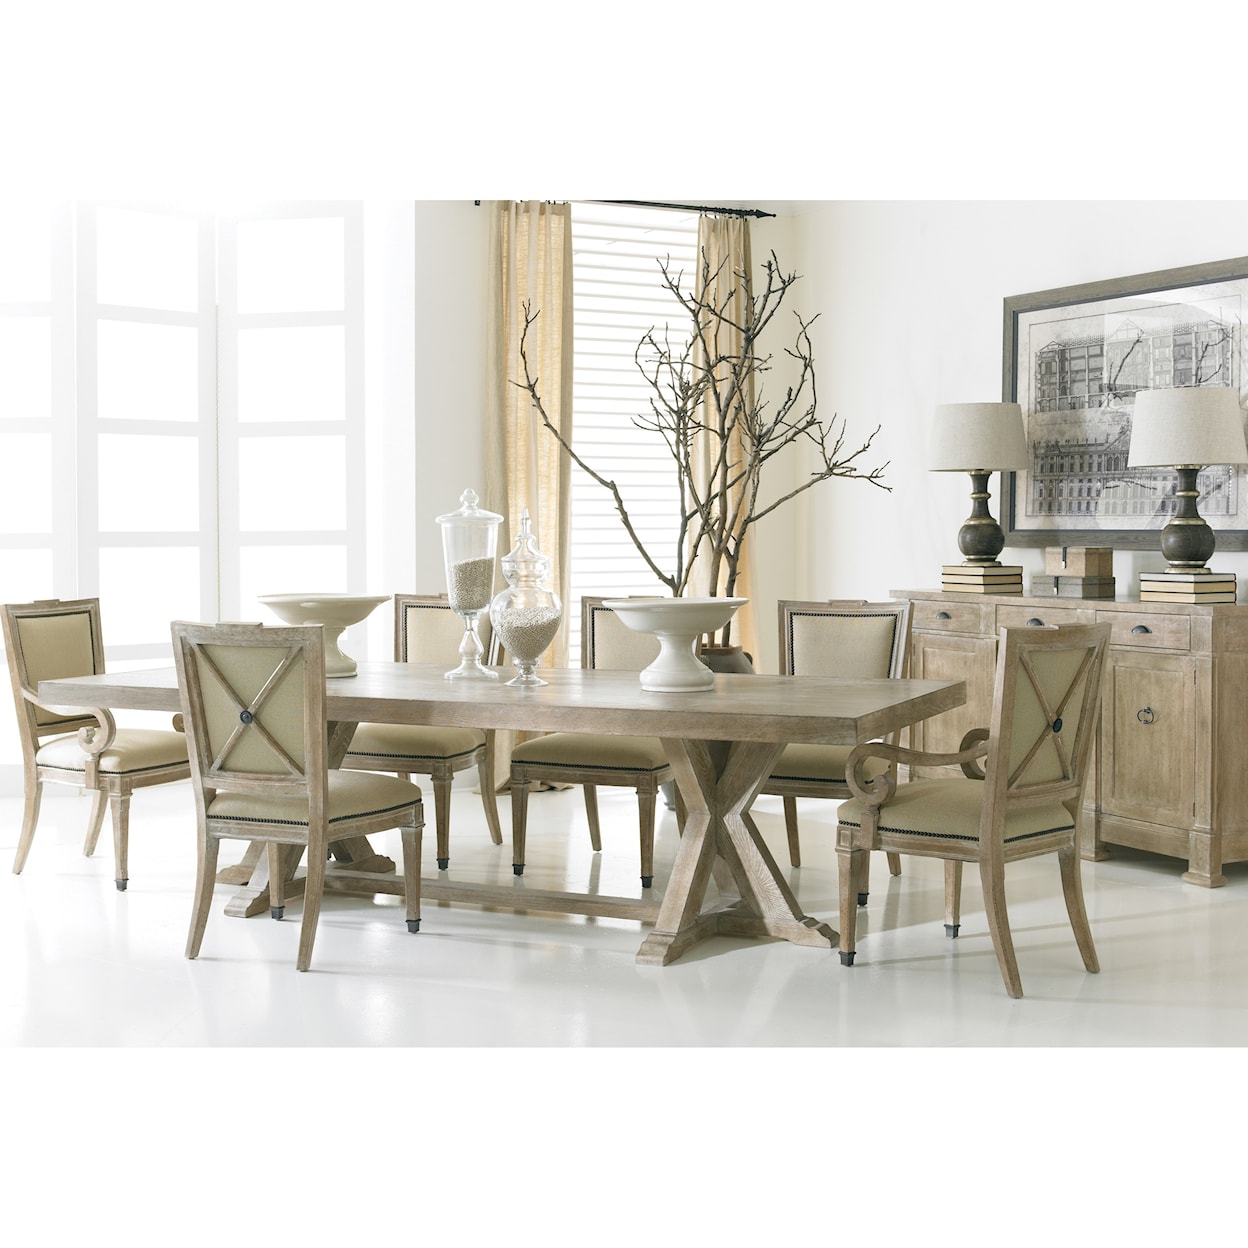 Hickory White Urban Loft Collection Rectangular Dining Table